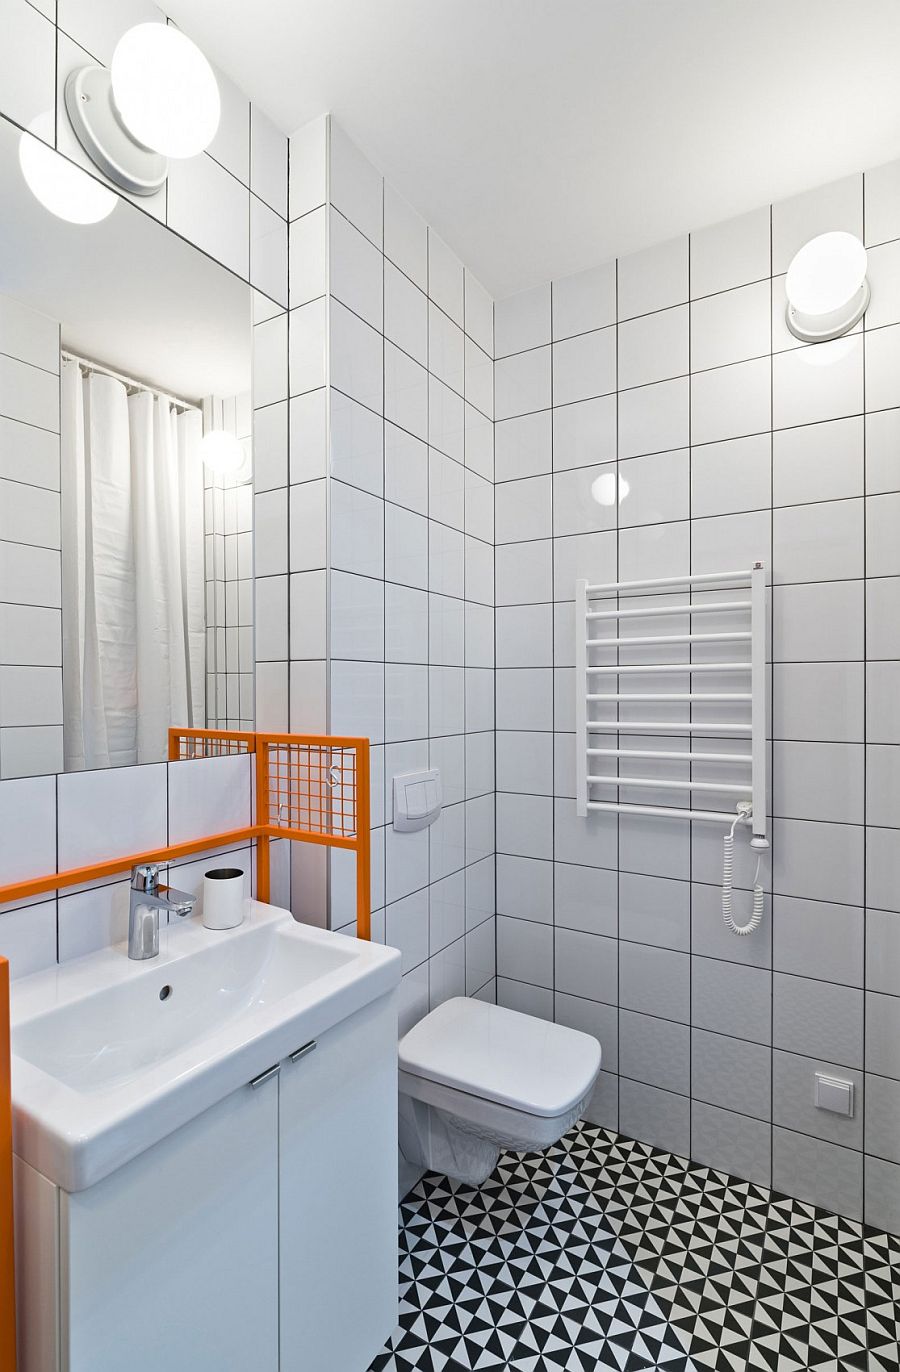 Black, white and gray shape a stylish, small bathroom inside the Poznan apartment